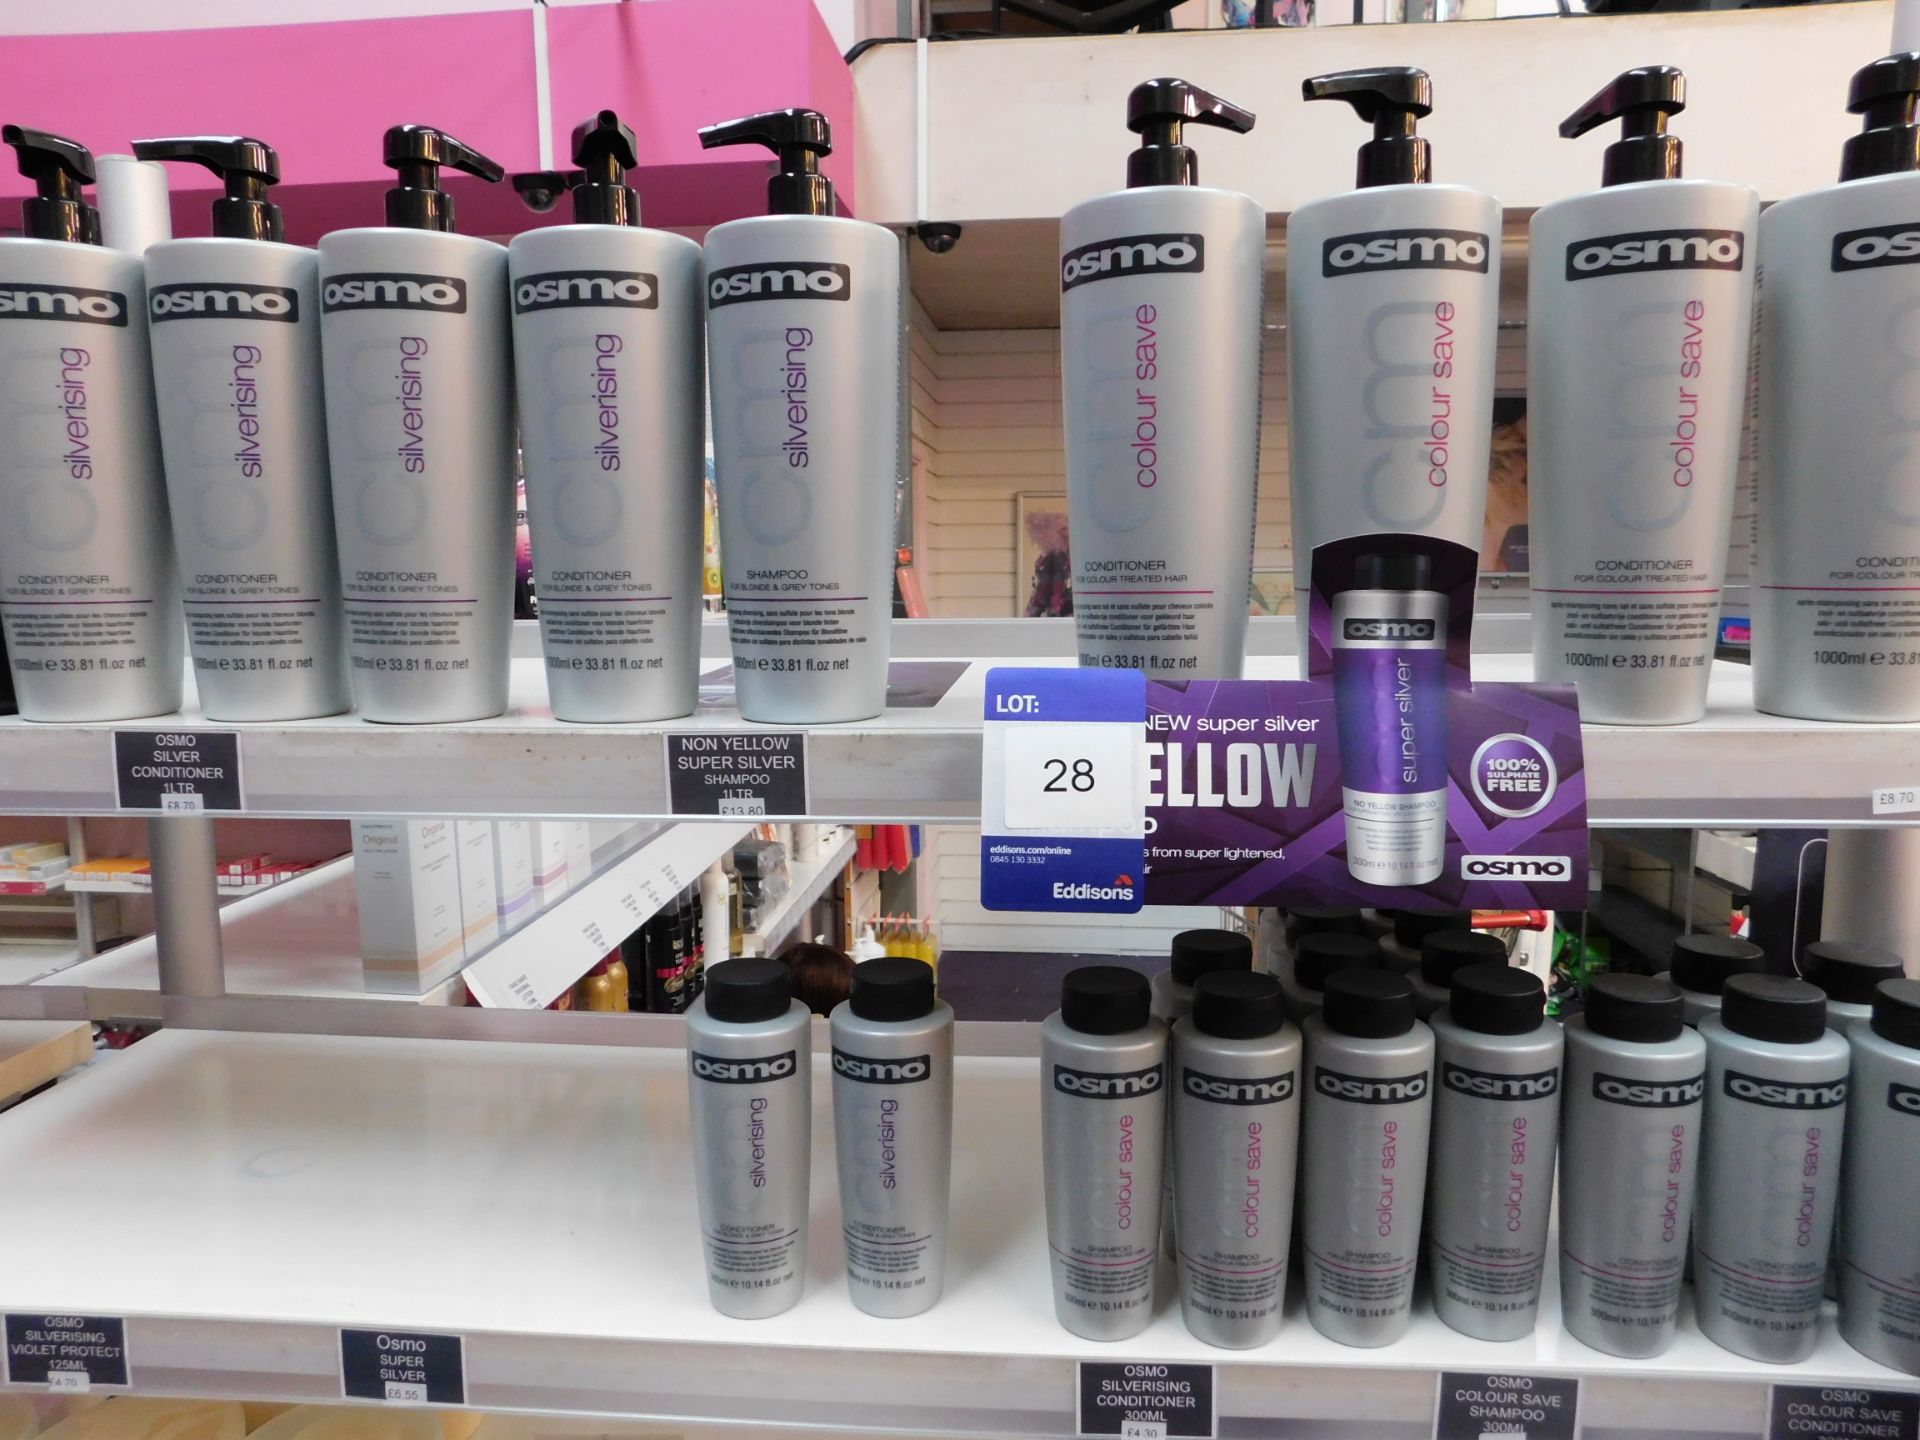 2 x Bays of shop display shelving and contents, including assortment of Osmo shampoos and - Image 2 of 3